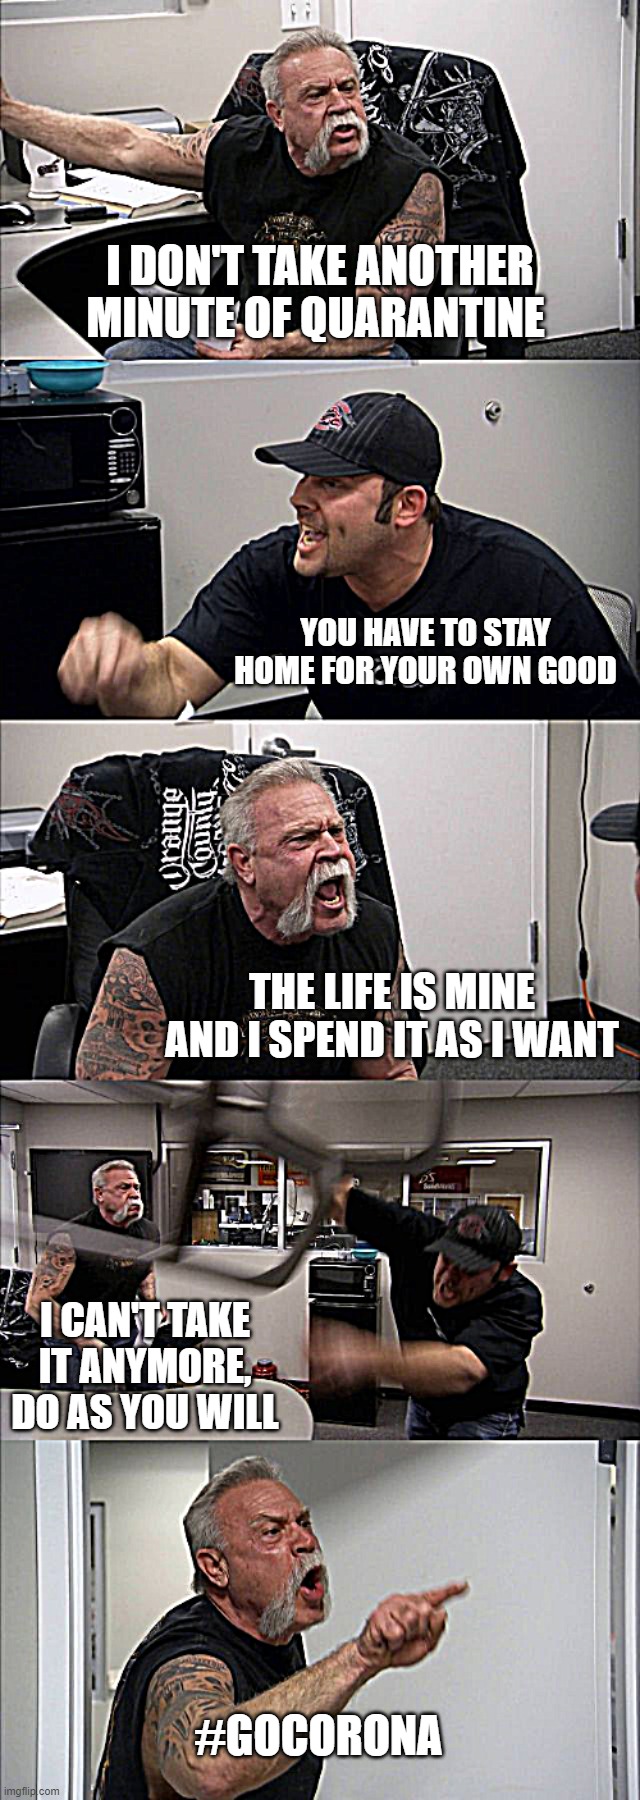 American Chopper Argument Meme | I DON'T TAKE ANOTHER MINUTE OF QUARANTINE; YOU HAVE TO STAY HOME FOR YOUR OWN GOOD; THE LIFE IS MINE AND I SPEND IT AS I WANT; I CAN'T TAKE IT ANYMORE, DO AS YOU WILL; #GOCORONA | image tagged in memes,american chopper argument | made w/ Imgflip meme maker